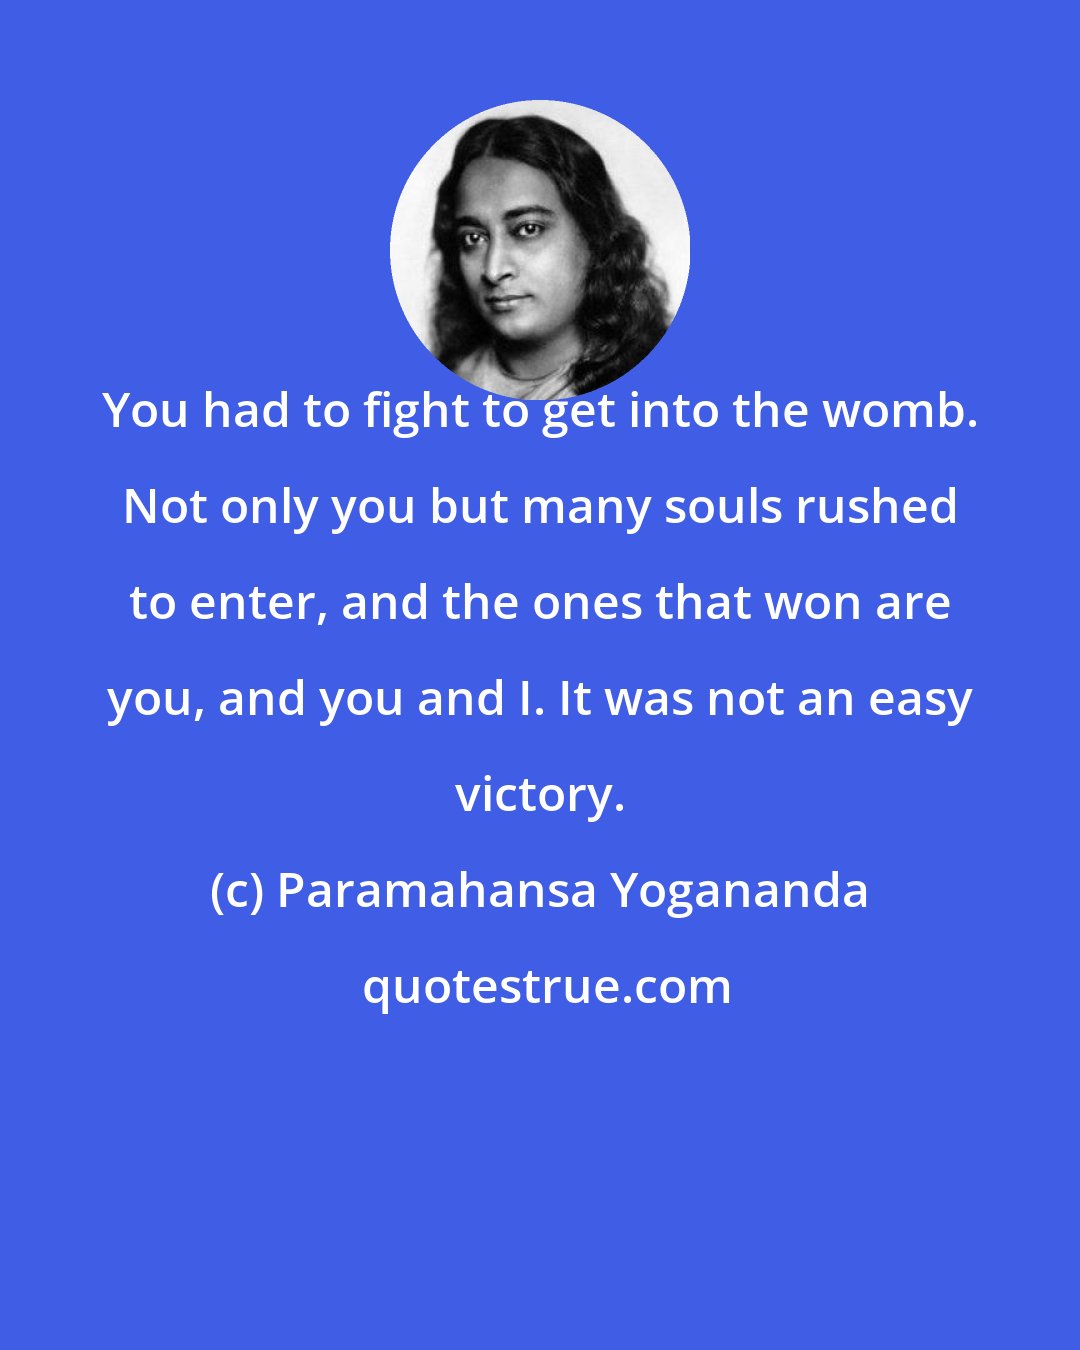 Paramahansa Yogananda: You had to fight to get into the womb. Not only you but many souls rushed to enter, and the ones that won are you, and you and I. It was not an easy victory.